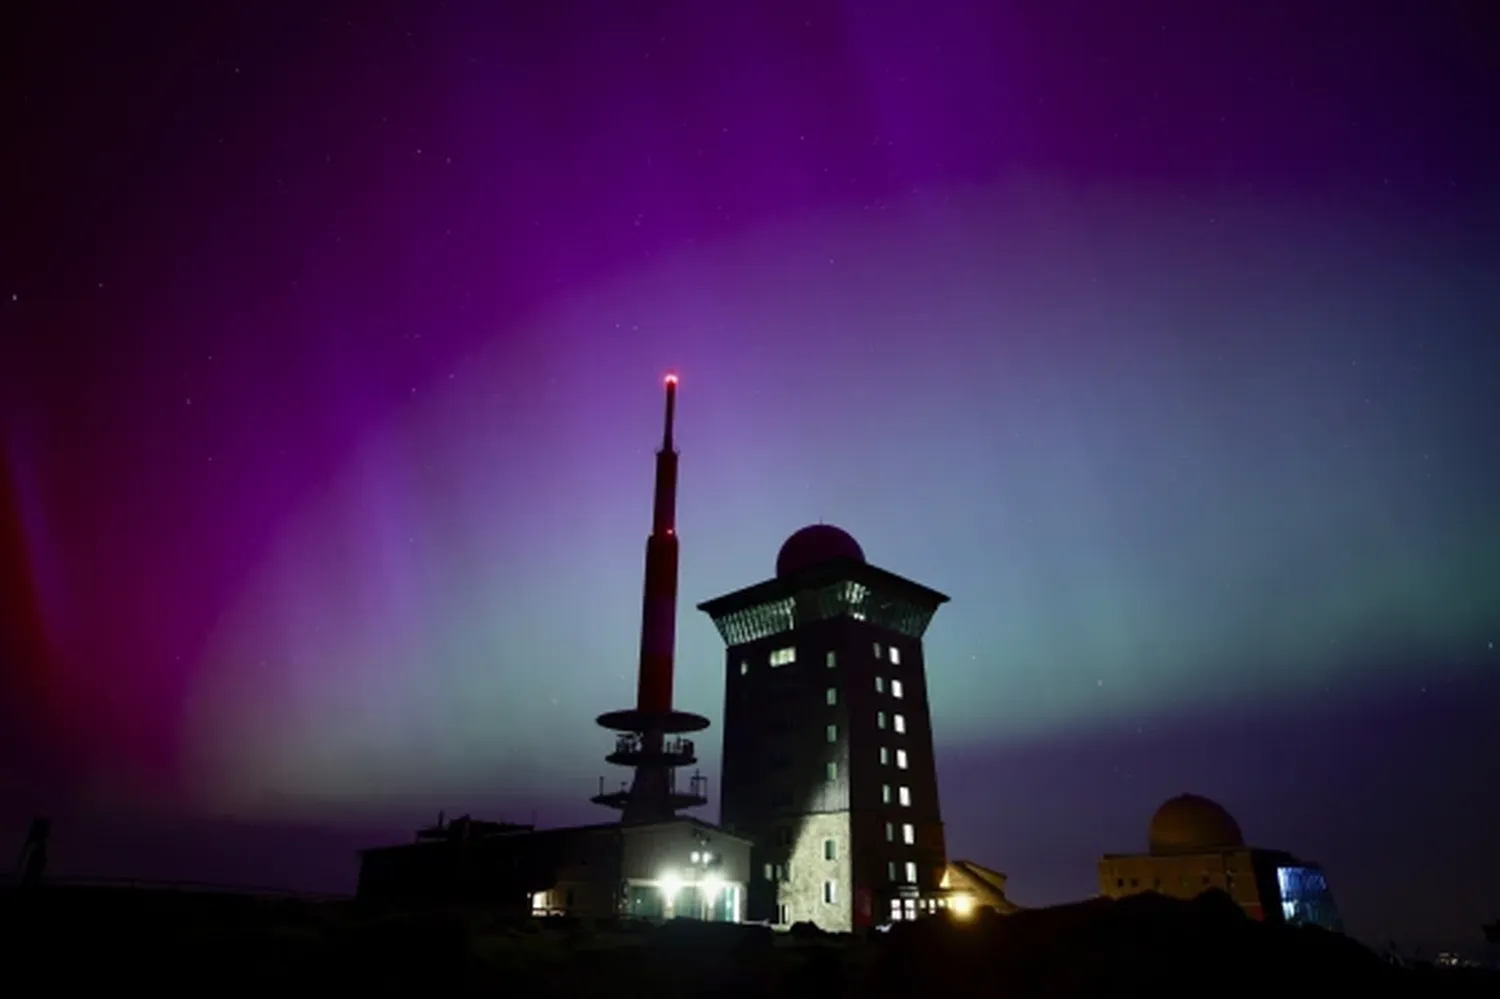 Northern lights appear in the night sky above the Brocken in Schierke, northern Germany on Saturday.